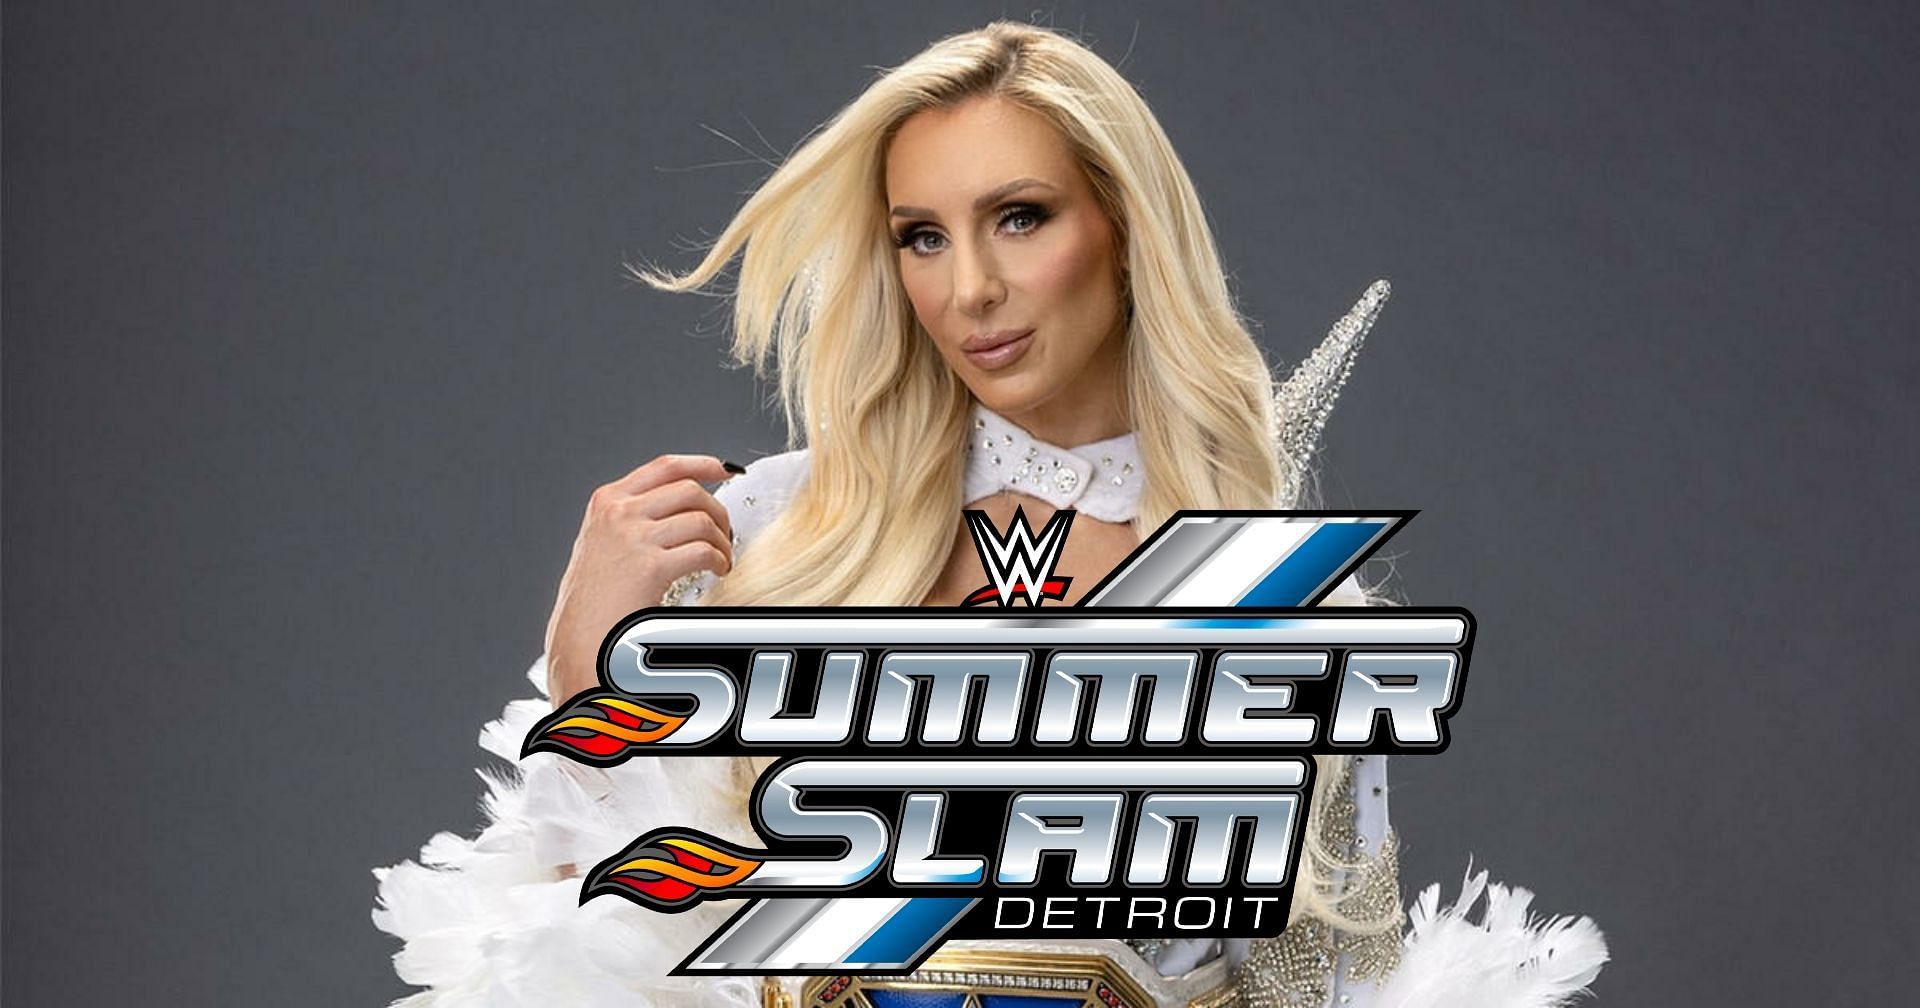 Latest on WWE's SummerSlam plans for Charlotte Flair - Reports